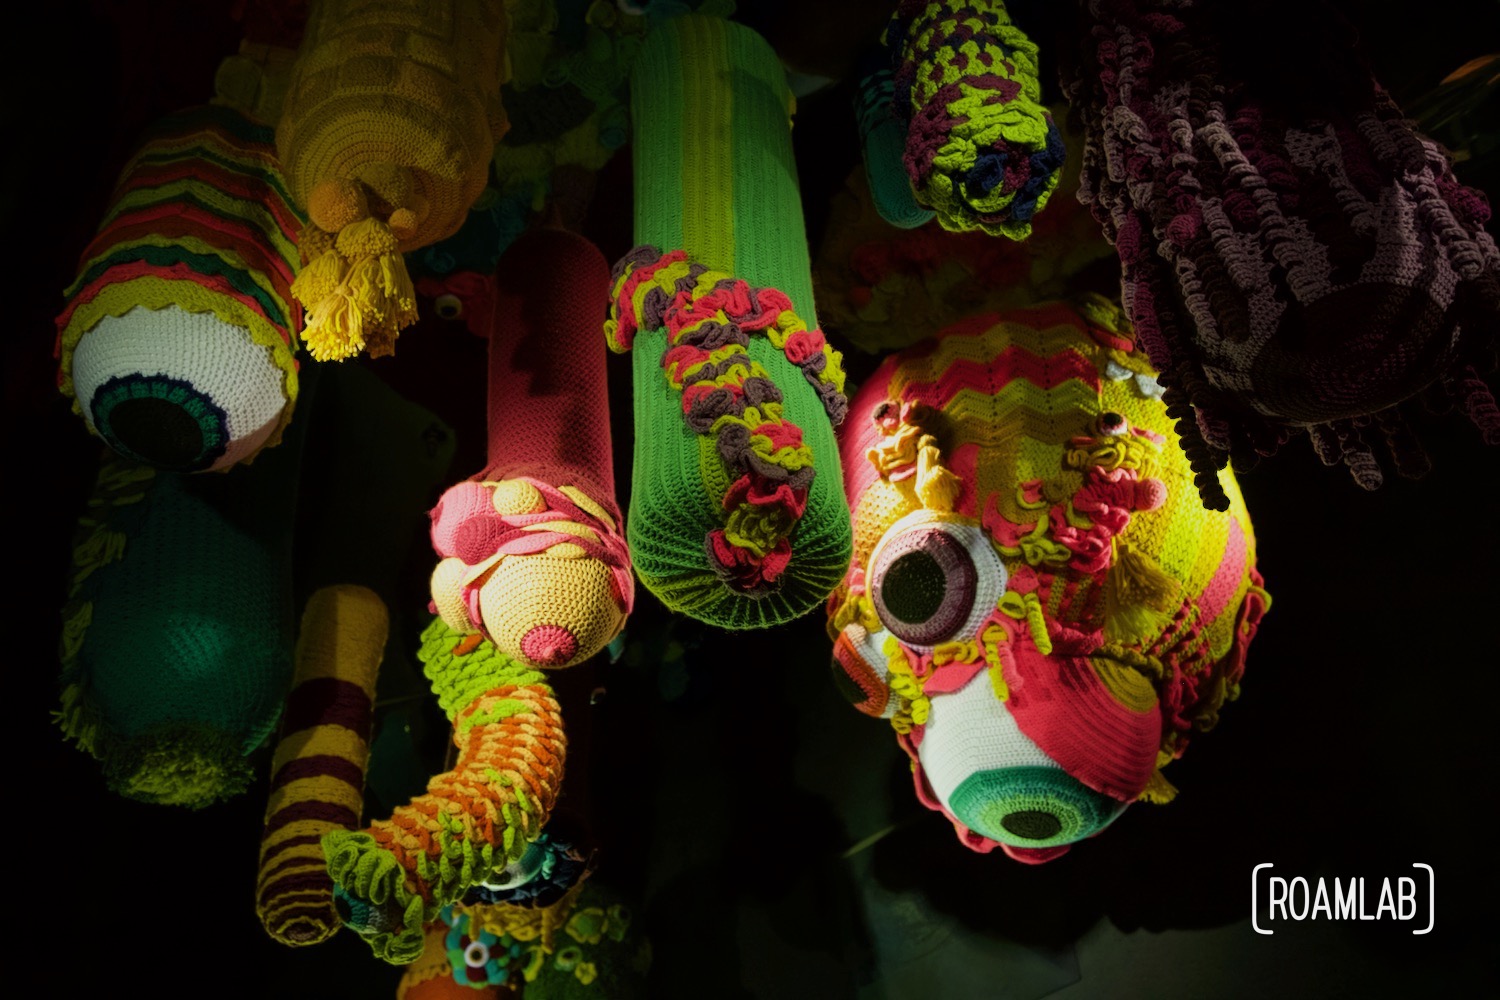 Surreal hanging crochet eye sculptures in Meow Wolf's Denver Colorado location, Convergence Station.